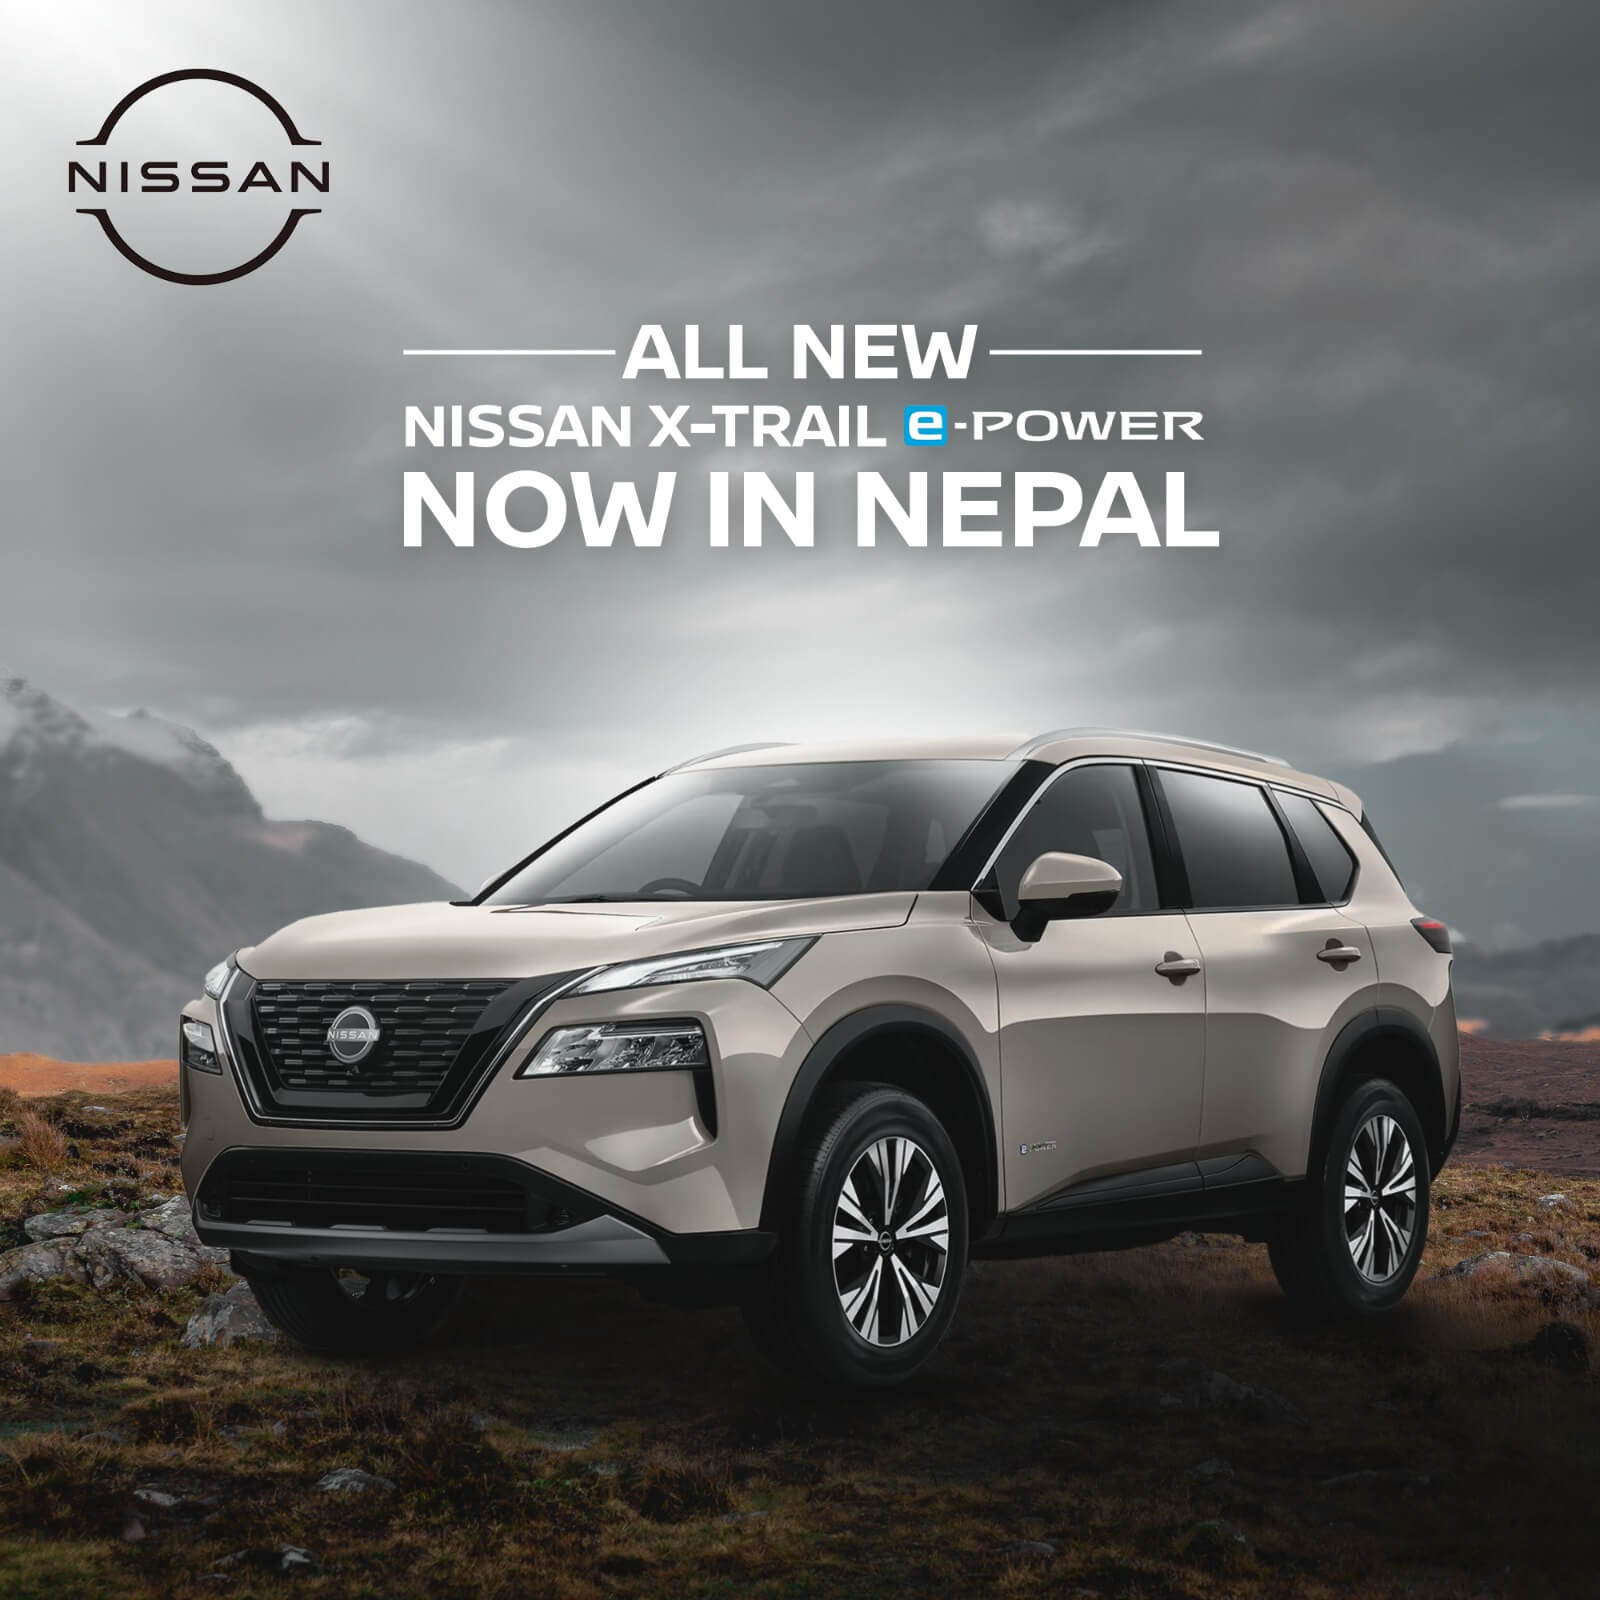 Nissan X-Trail e-Power Launched: 7-Seater Electrified SUV in Nepal!